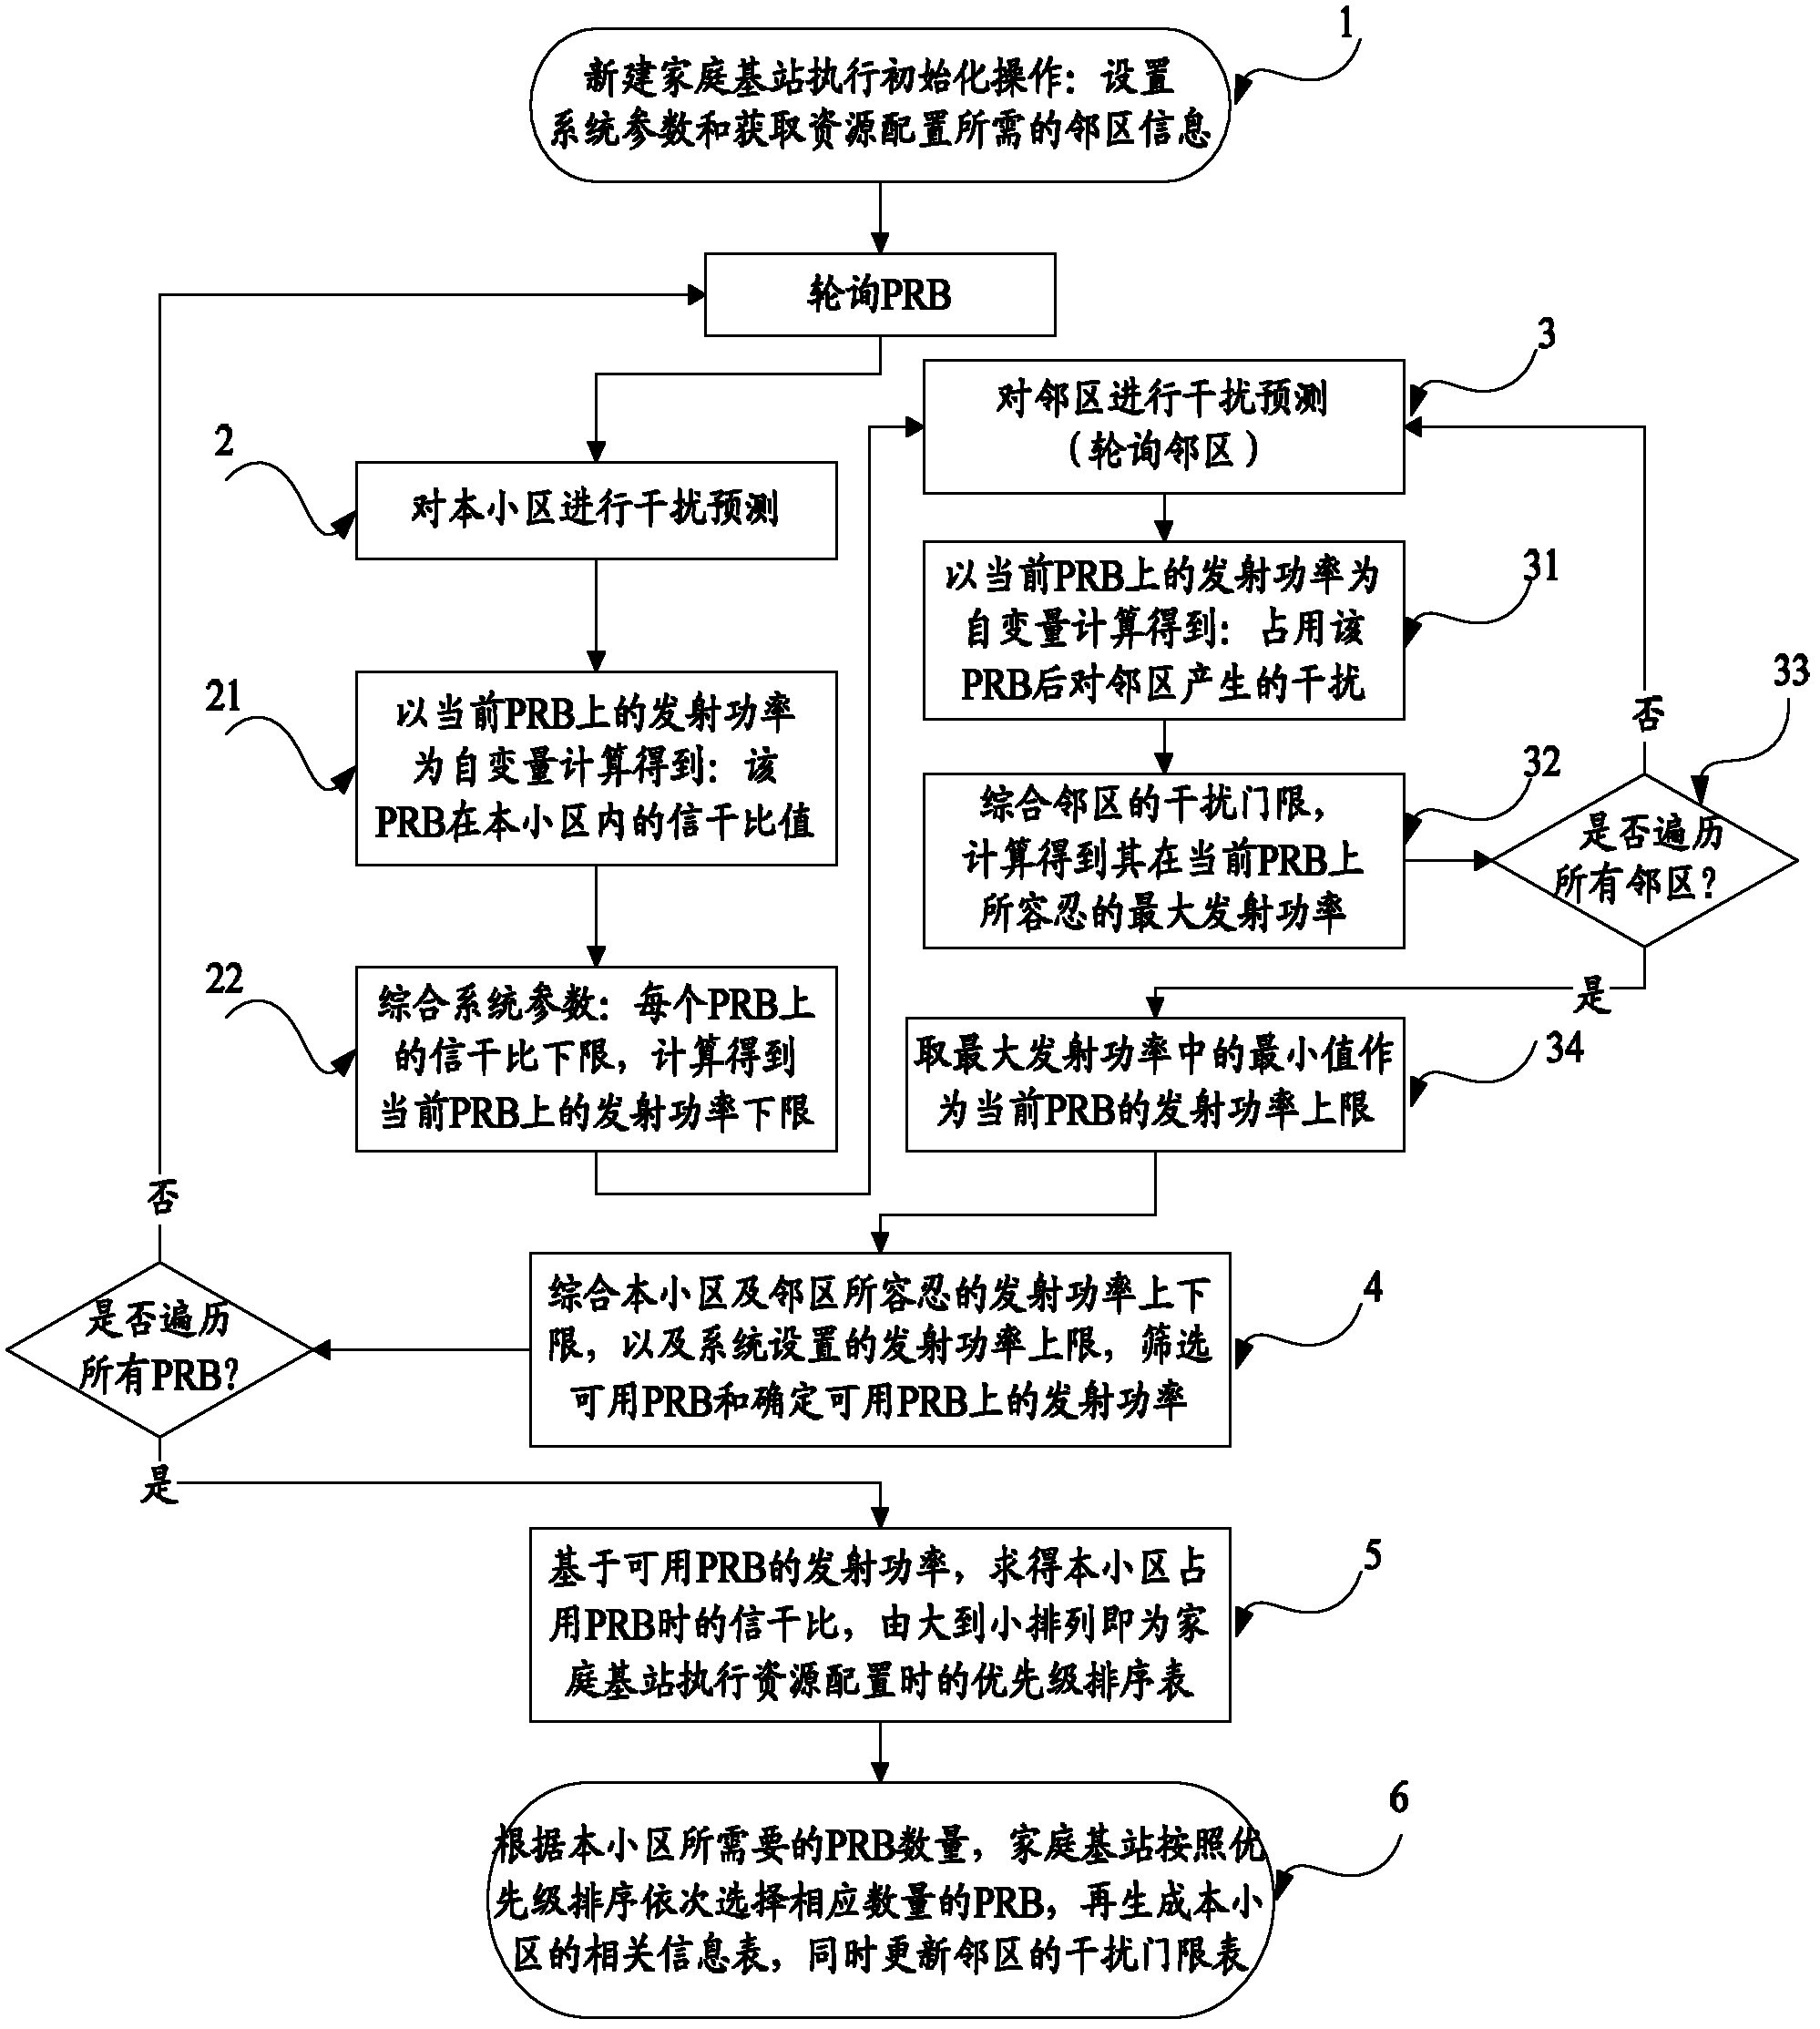 Resource configuration method for family base station